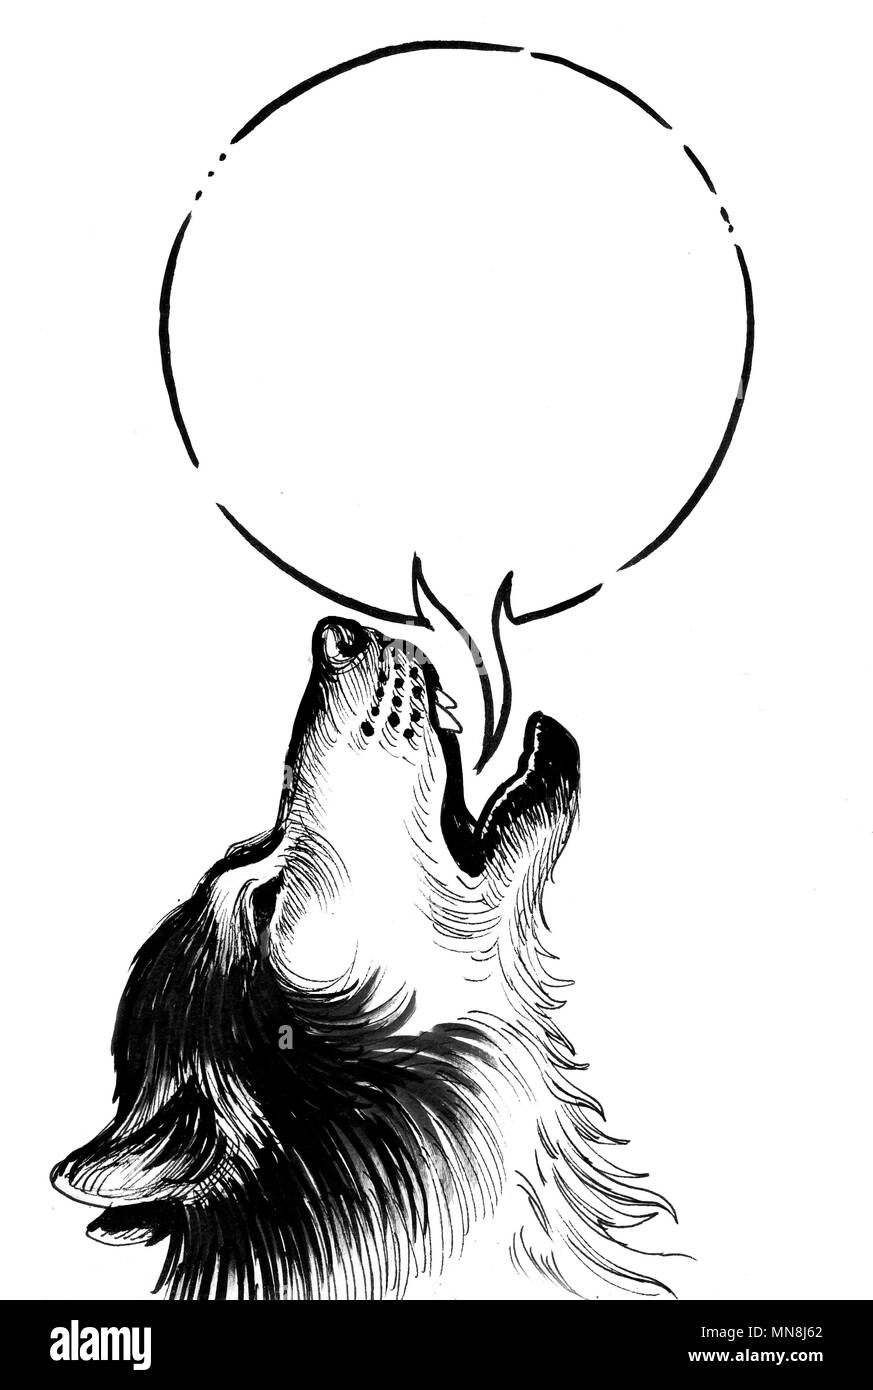 Howling wolf with a speech balloon. Ink black and white illustration Stock Photo